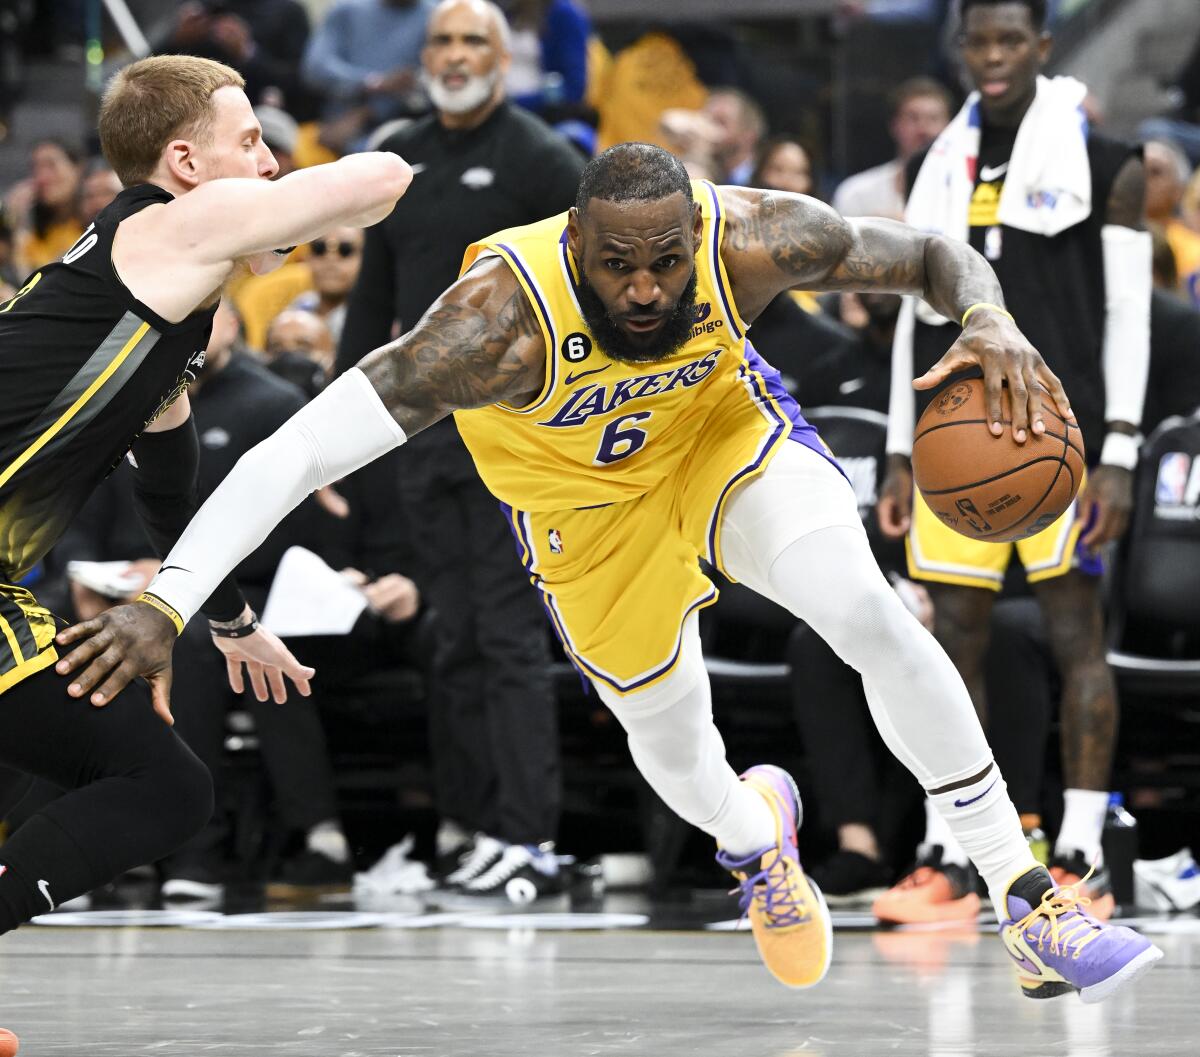 Lakers forward LeBron James leaning down and dribbling around Warriors guard Donte DiVincenzo 